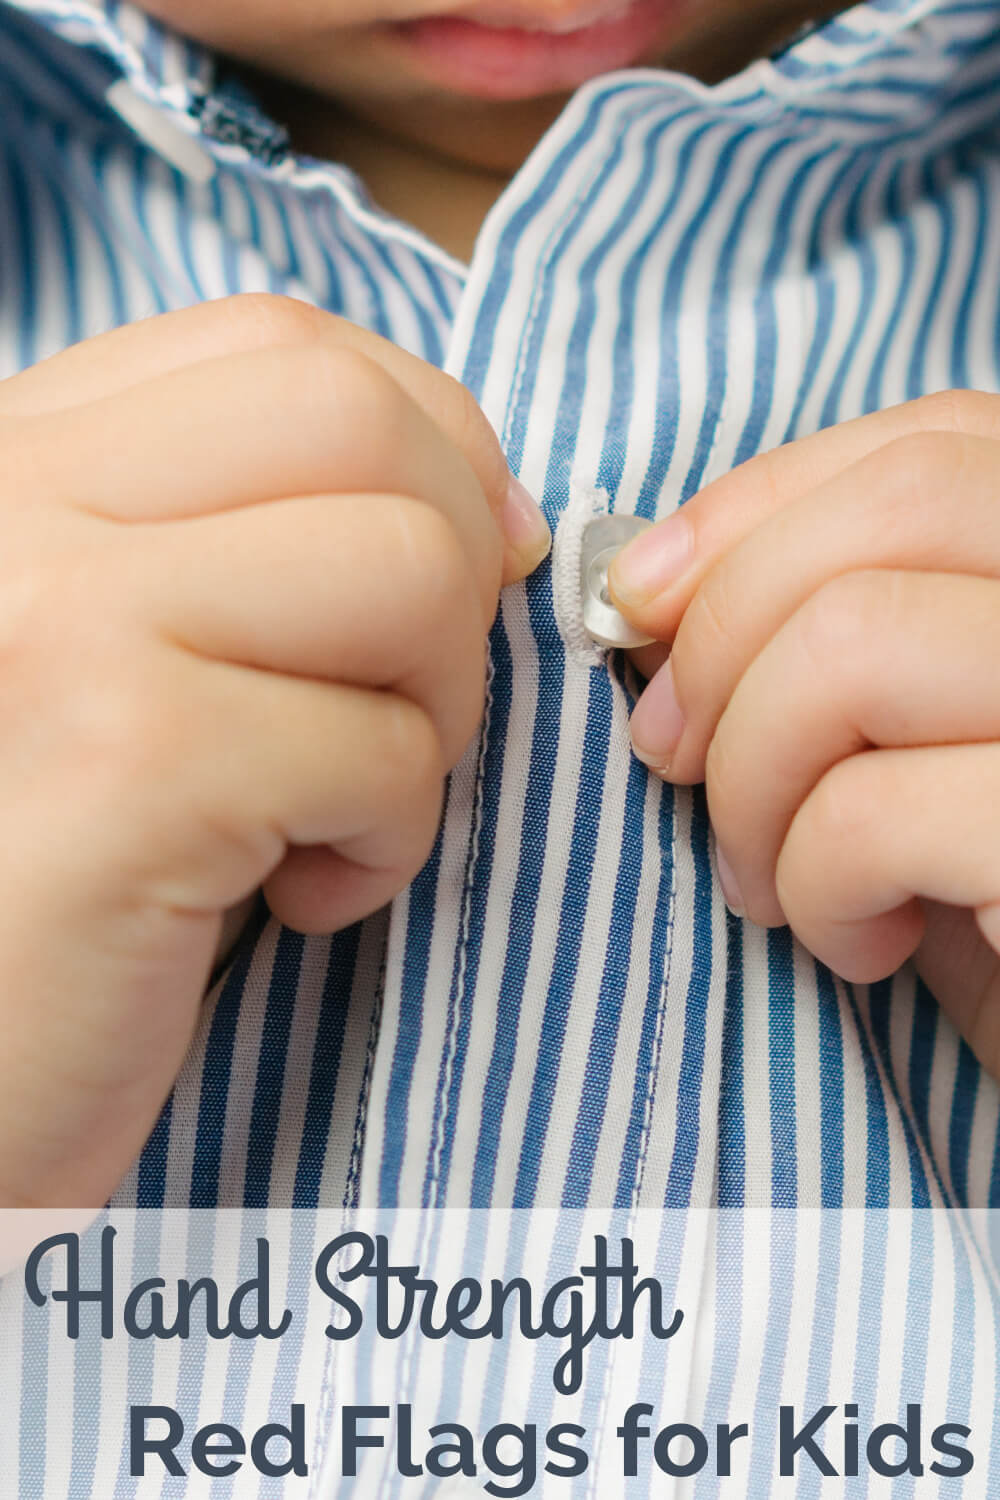 Closeup of child buttoning his shirt with text about hand strengthening red flags for kids.